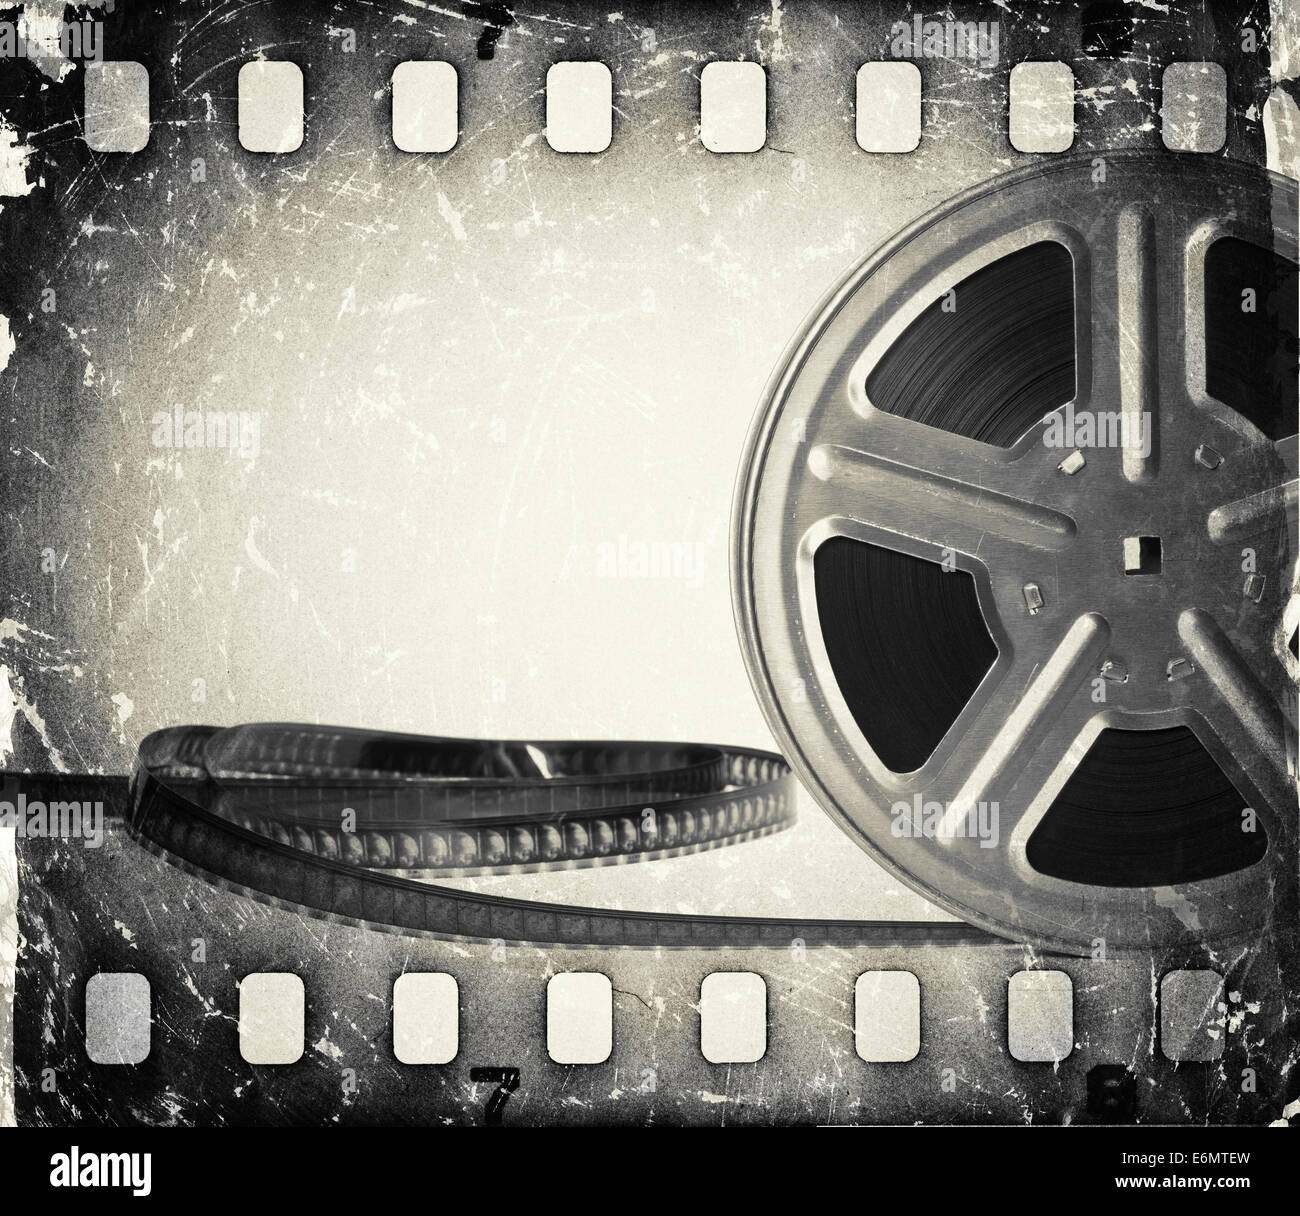 3d rendering of a single movie reel with steel casing in a front